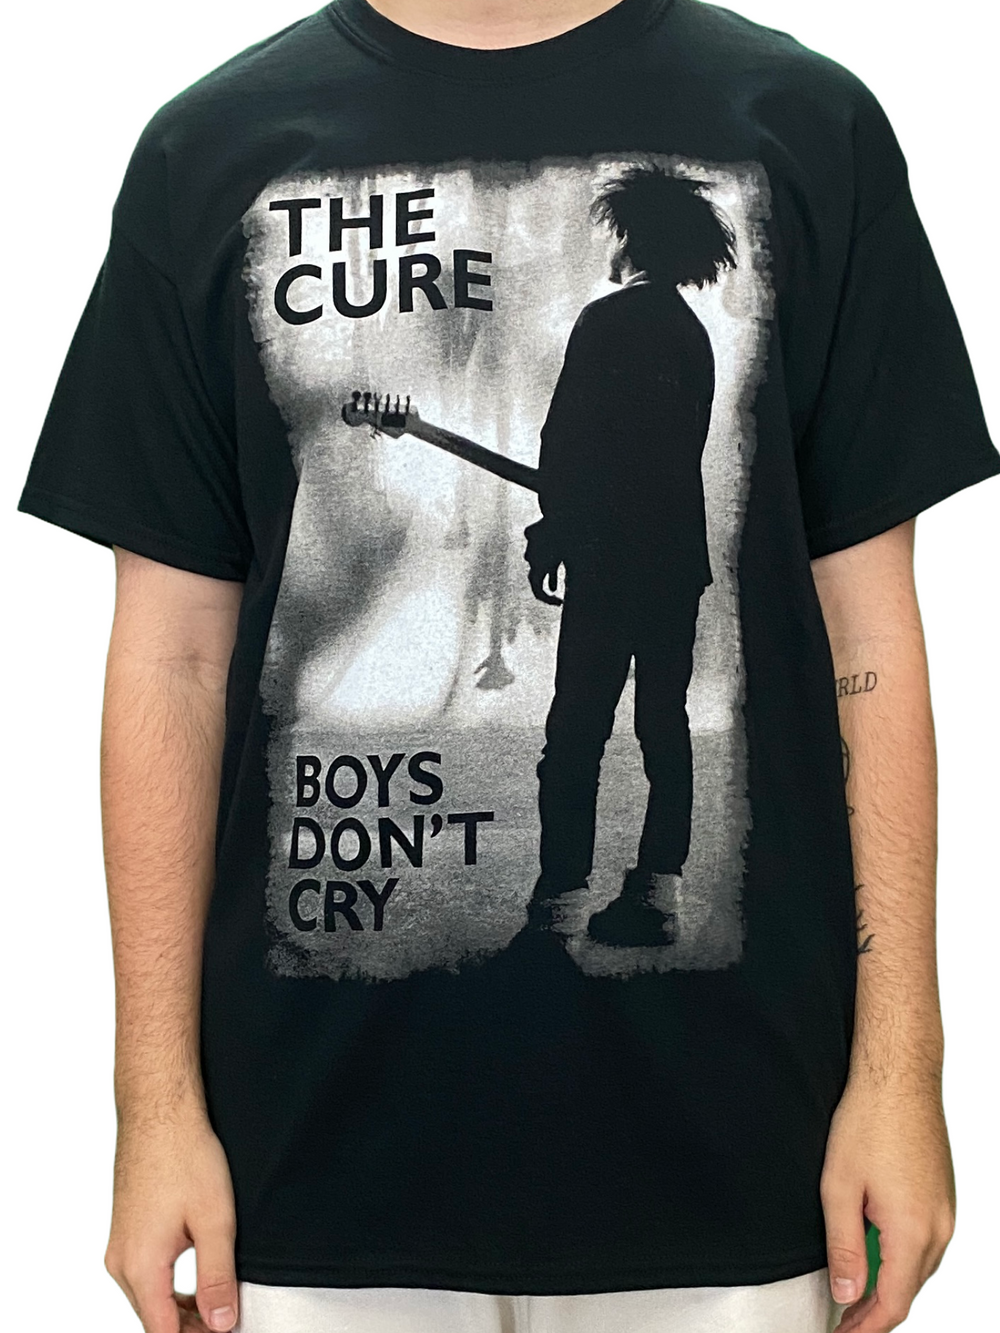 The Cure Boys Dont Cry Black & White Unisex Official T Shirt Brand New Various Sizes